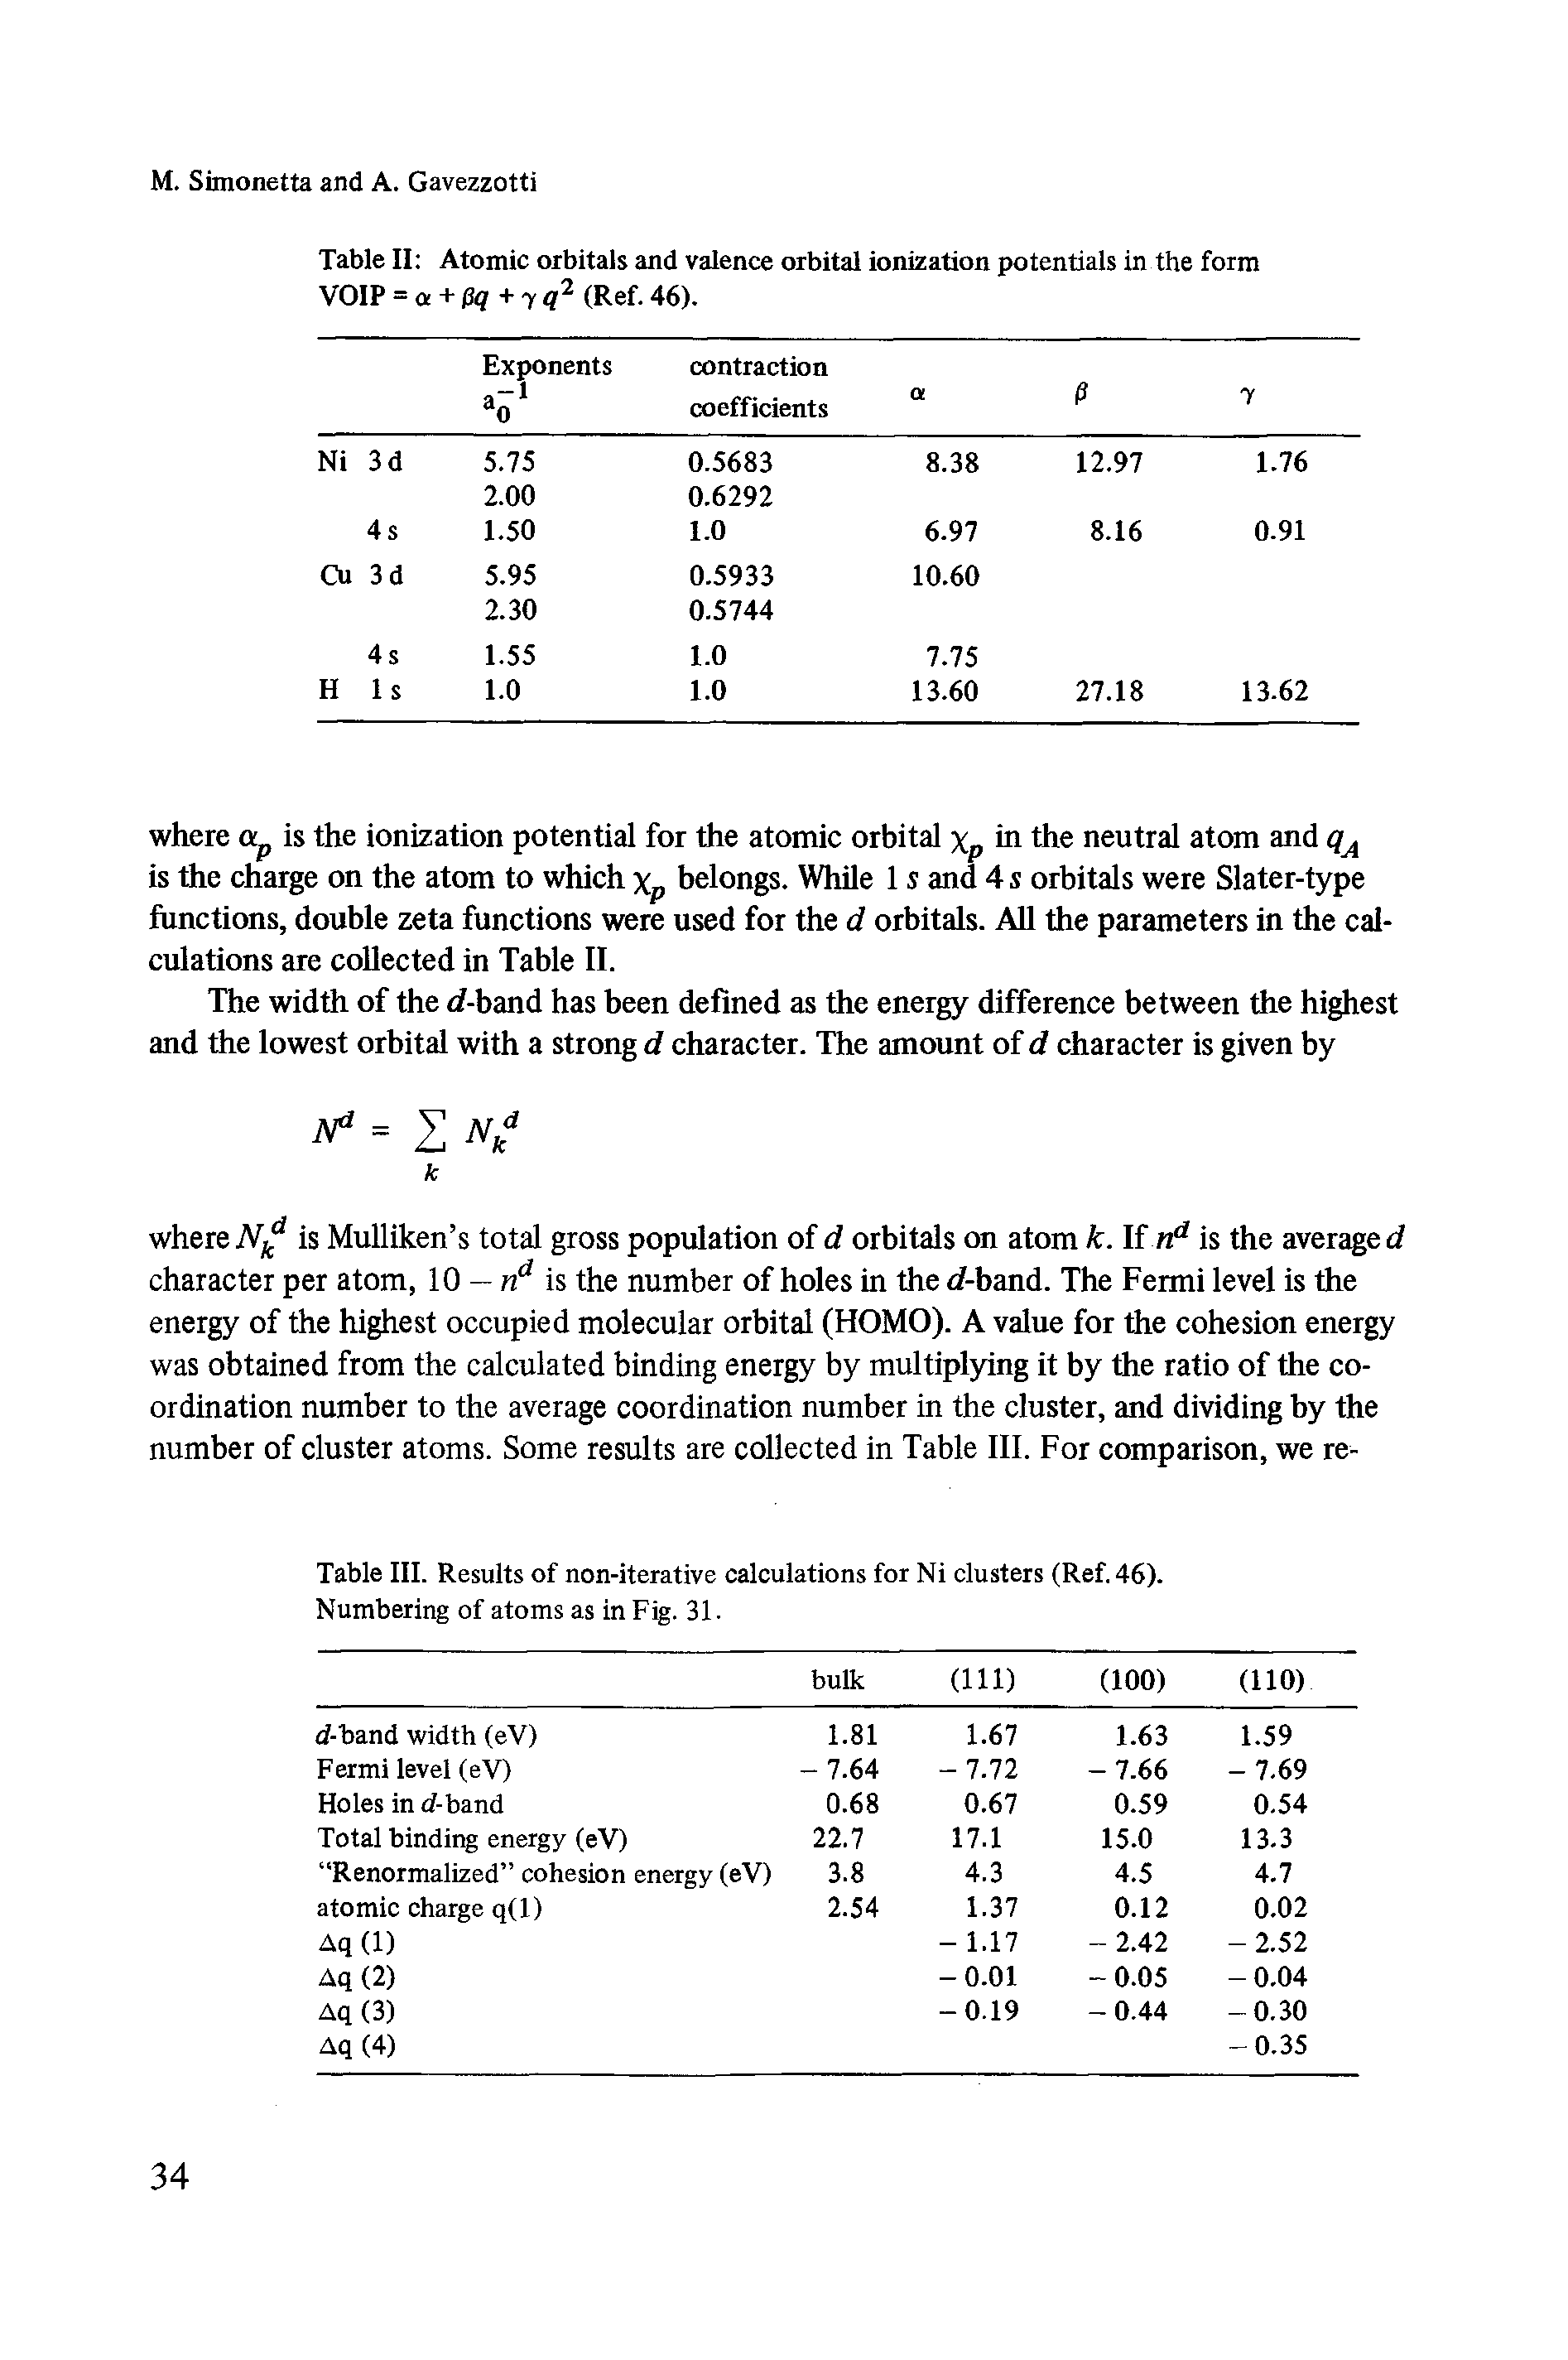 Table III. Results of non-iterative calculations for Ni clusters (Ref. 46). Numbering of atoms as in Fig. 31.